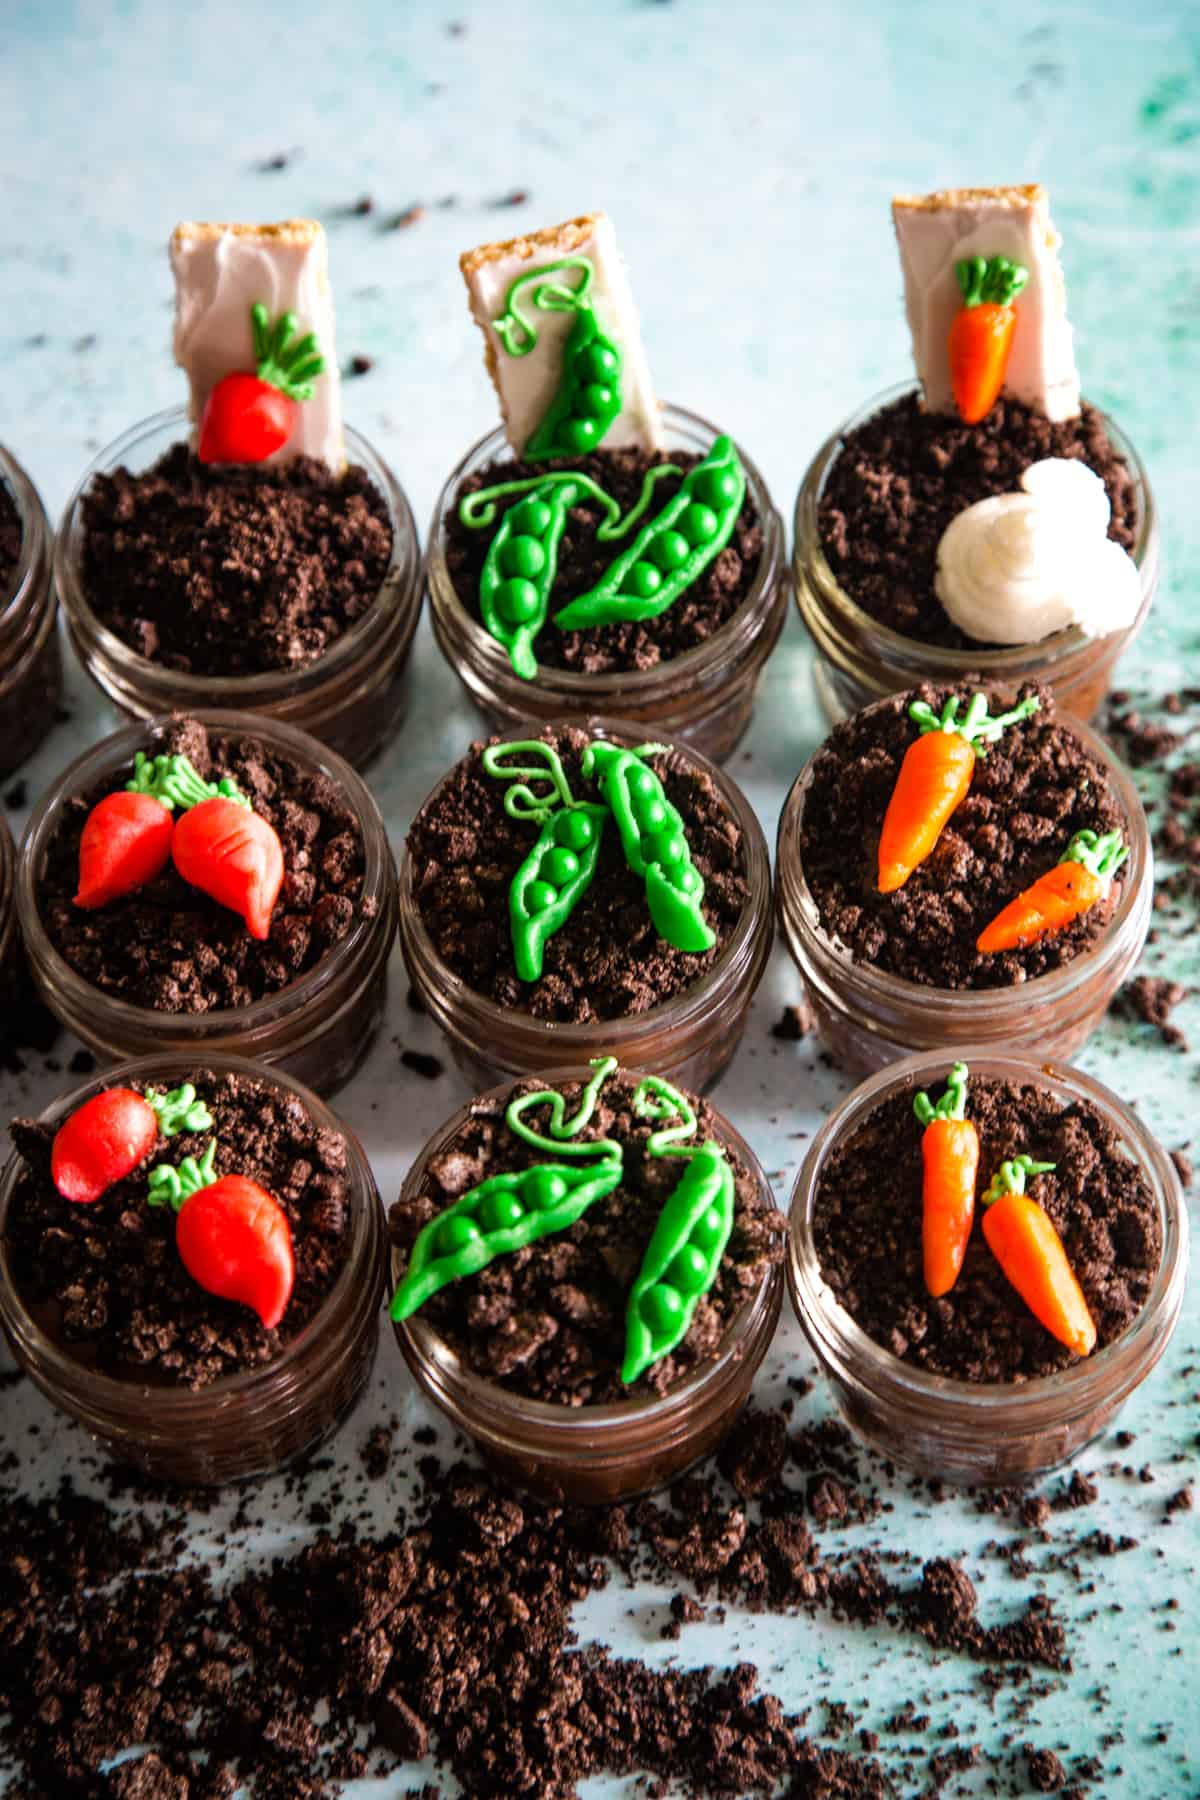 Easy Halloween Dirt Cup Recipes for Digging Your Own Grave | Yummly